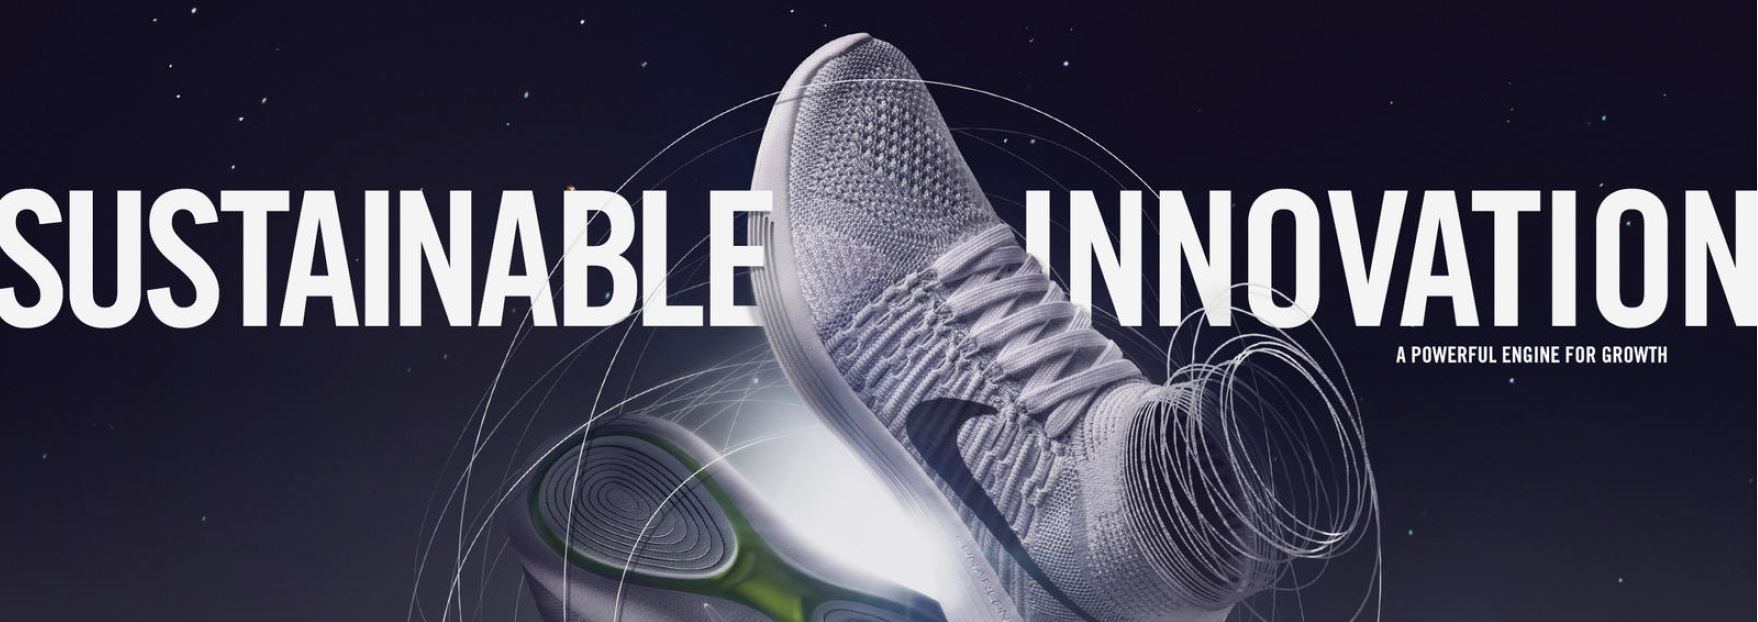 Desear delicado Mal funcionamiento Nike's Path to Sustainability - Technology and Operations Management